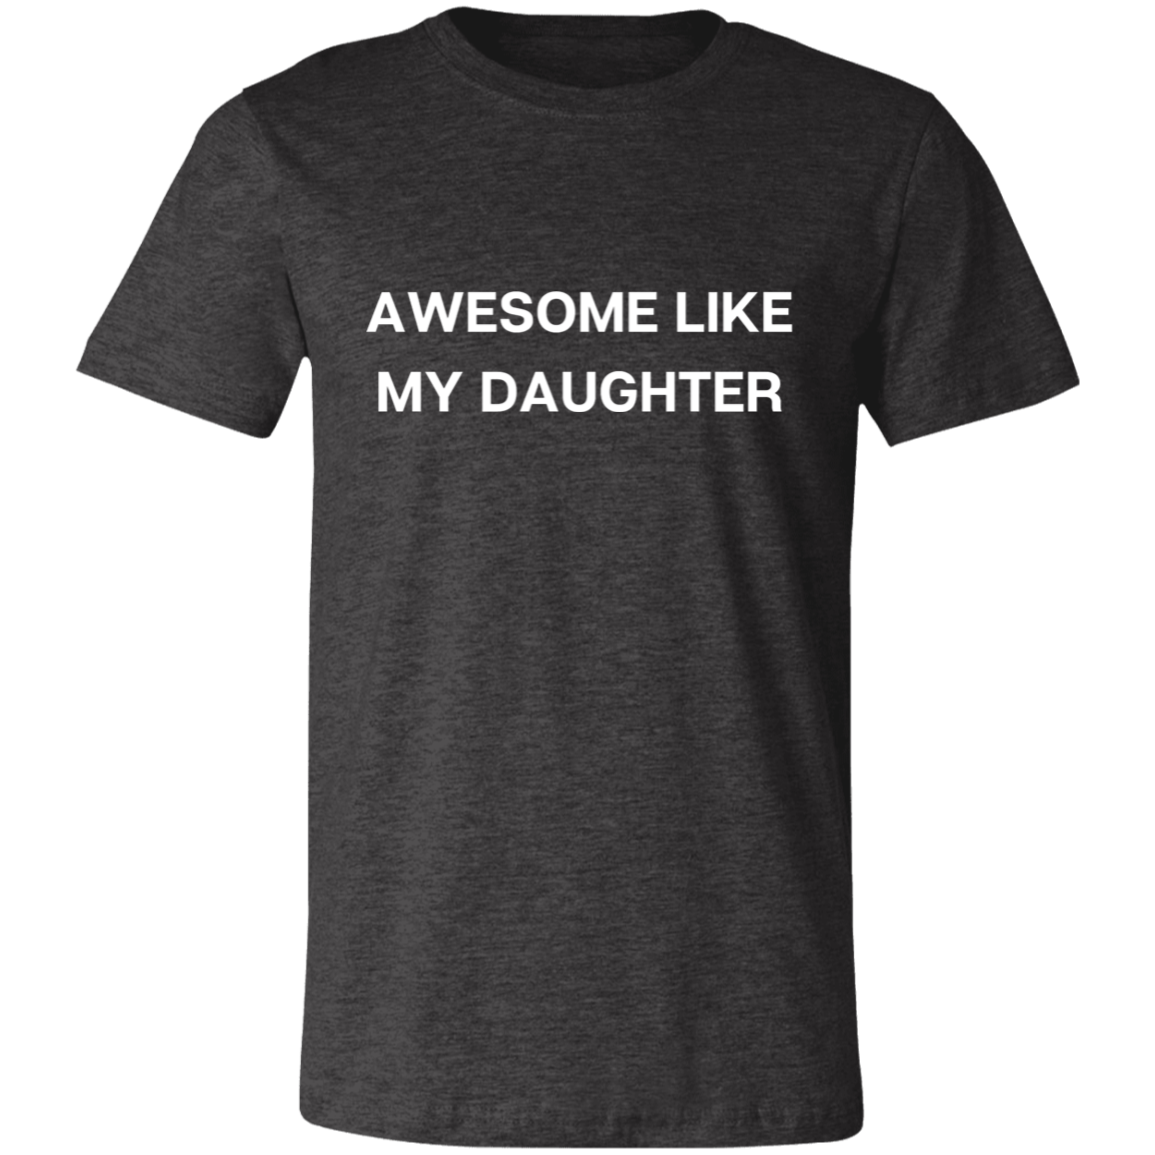 Awesome Like My Daughter (I) Short-Sleeve T-Shirt